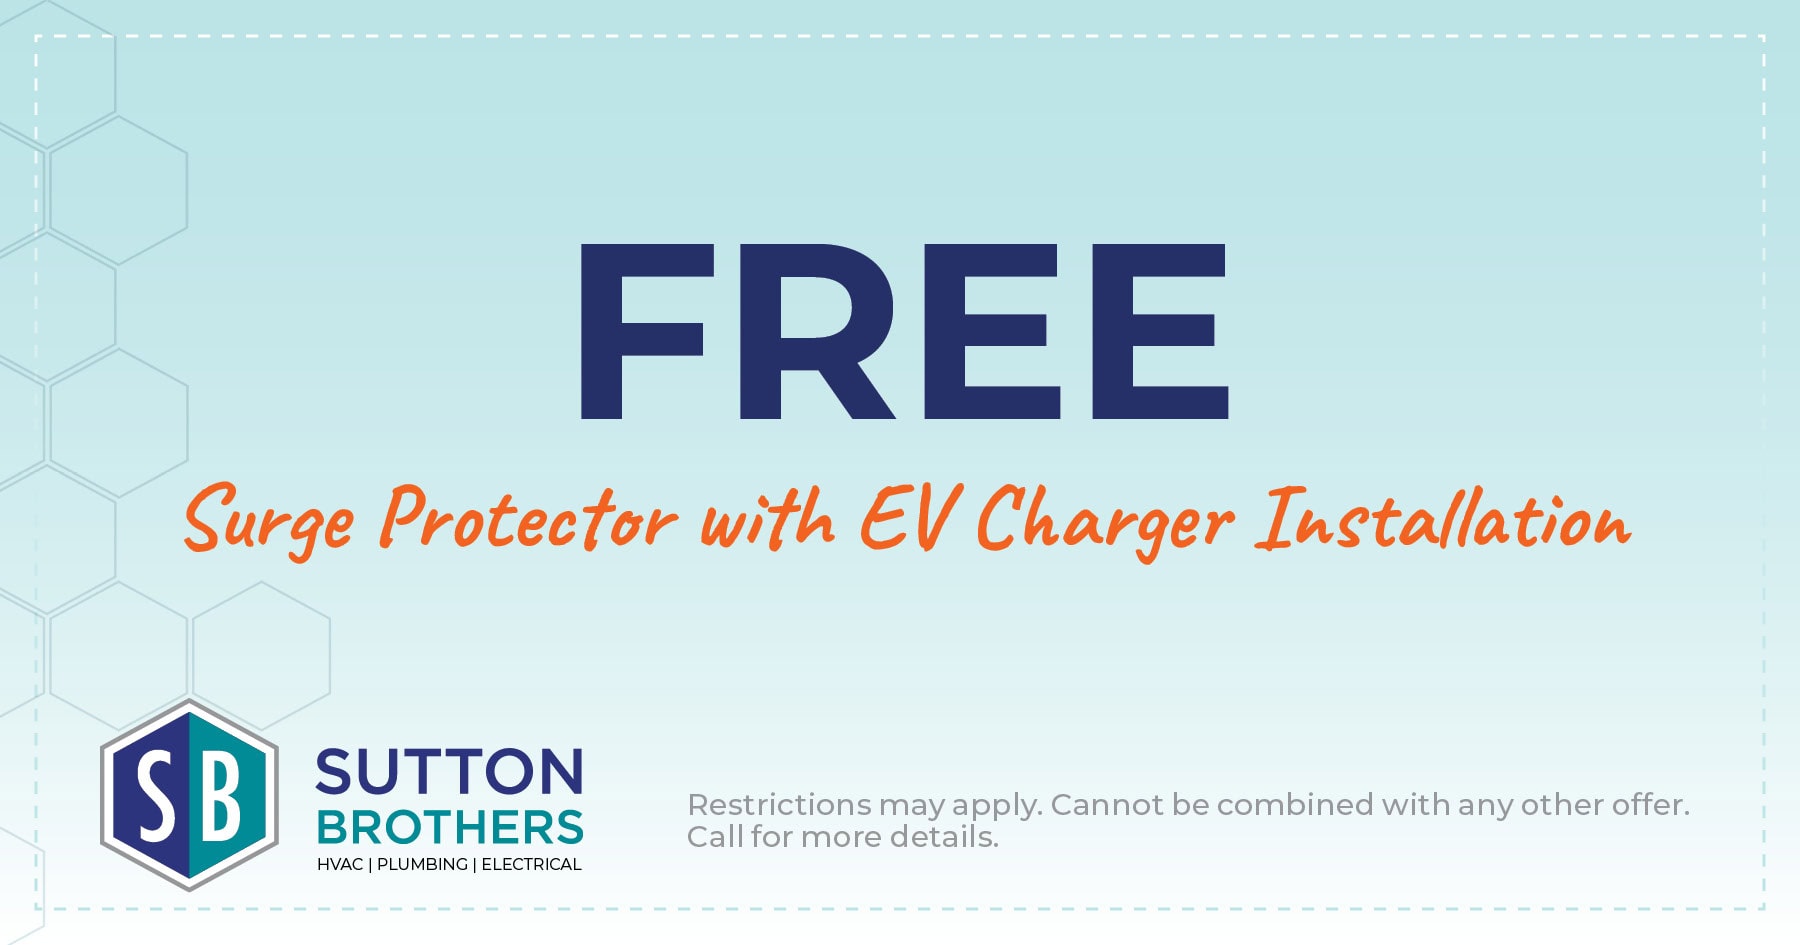 Free surge protector with EV charger installation.